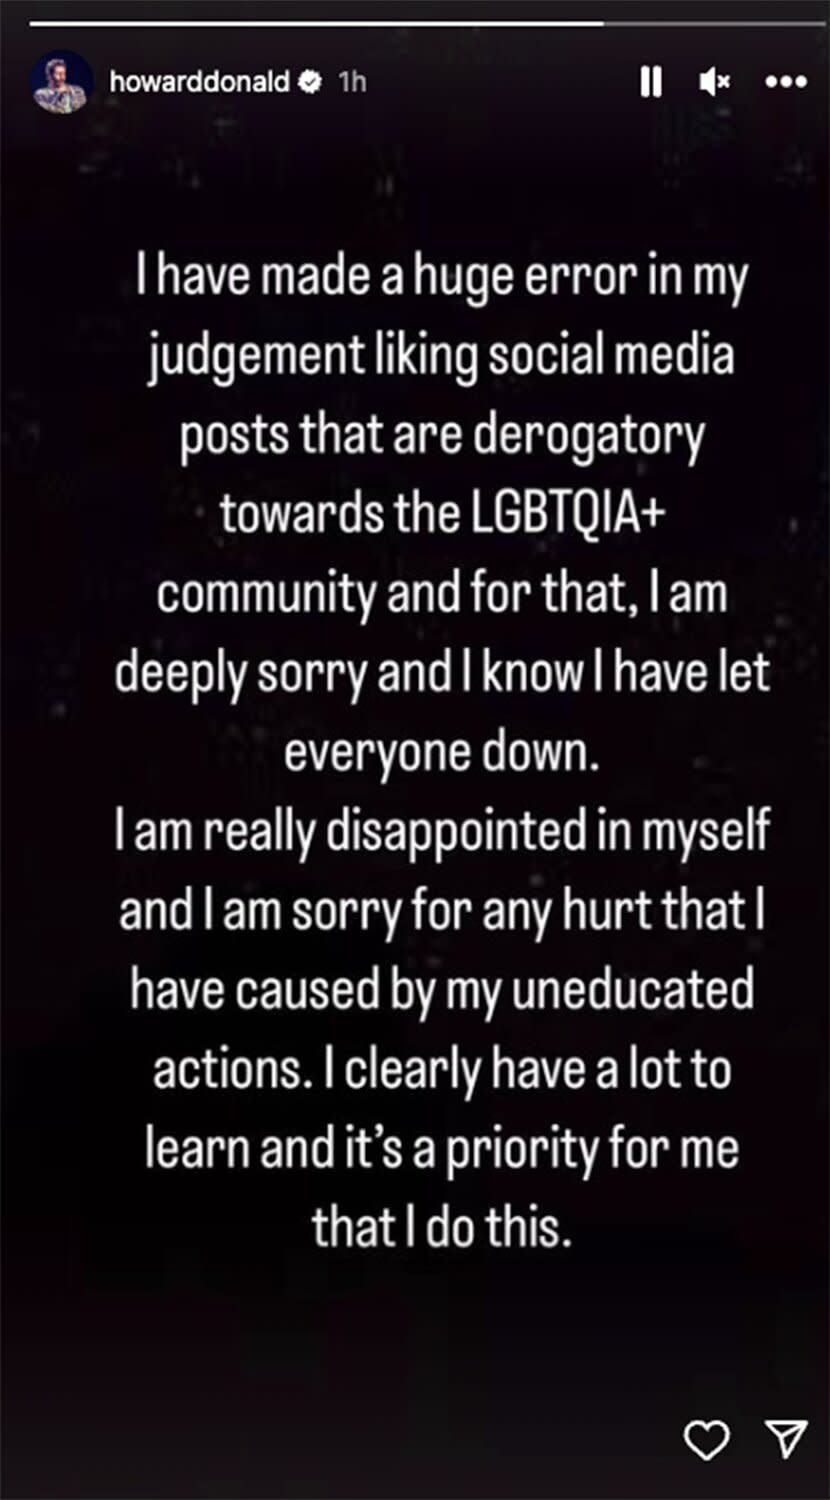 Screenshot of his apology on Howard Donald's Instagram Story.